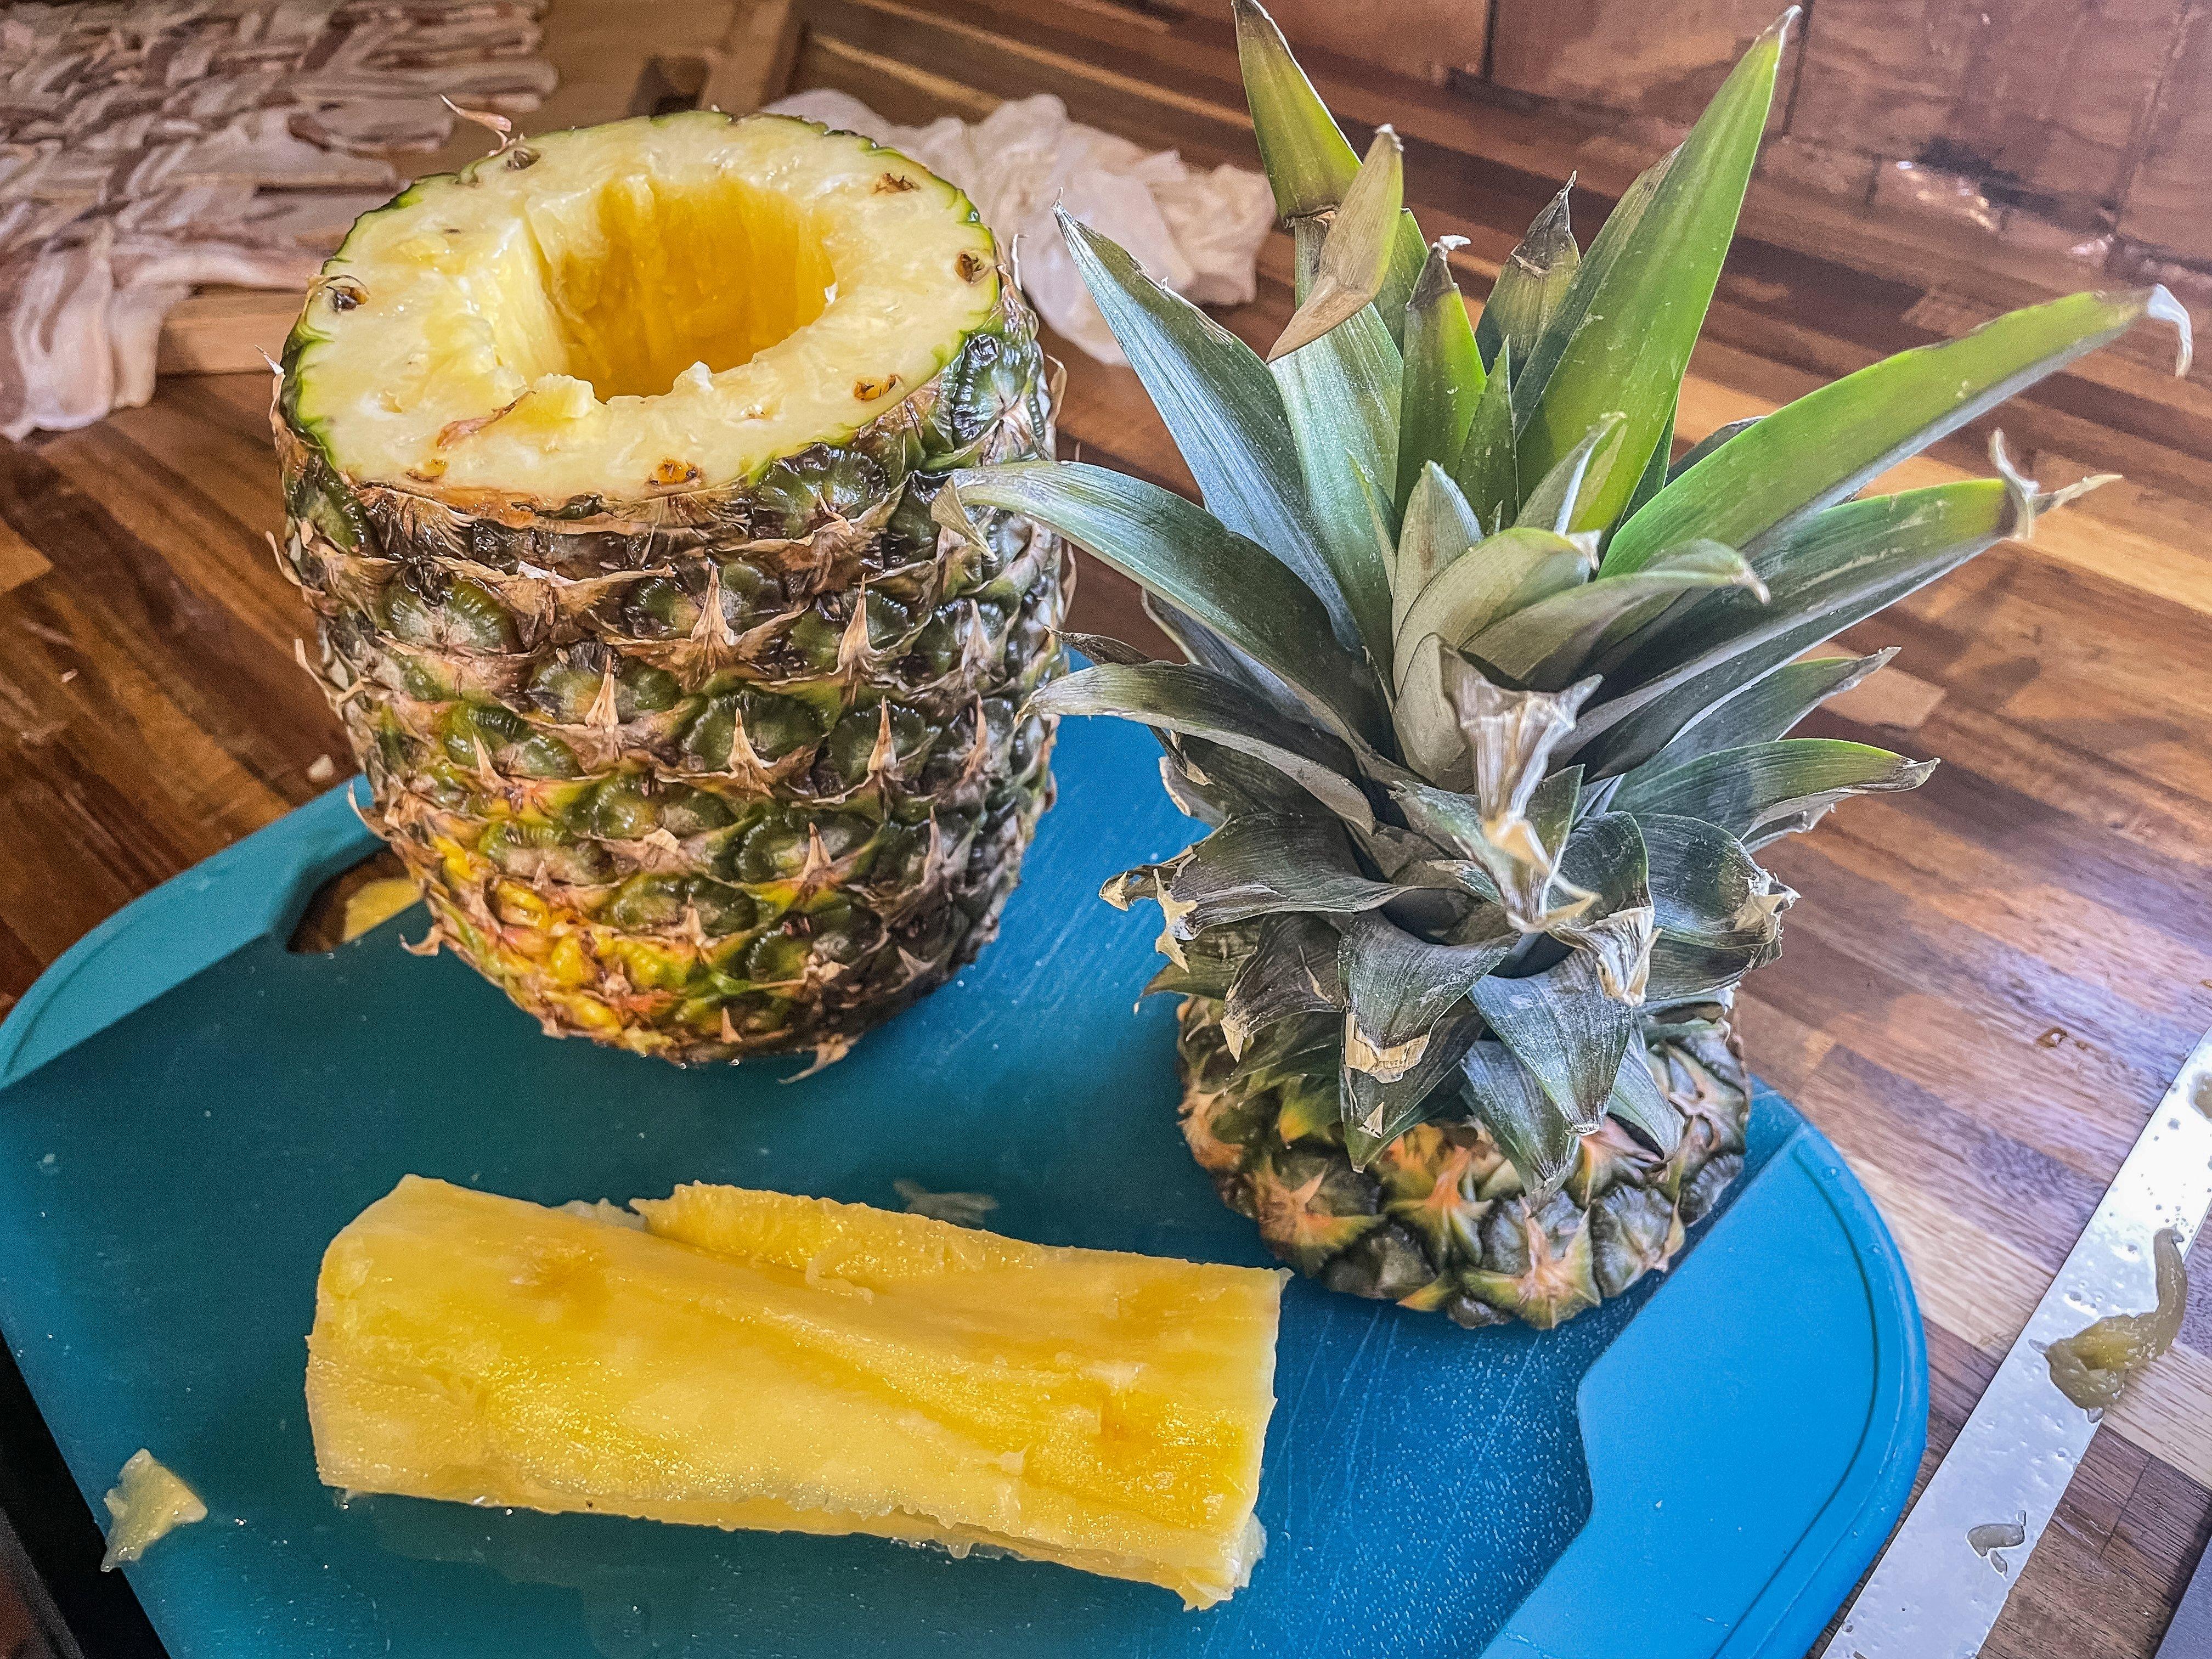 Remove the top and core the pineapple.